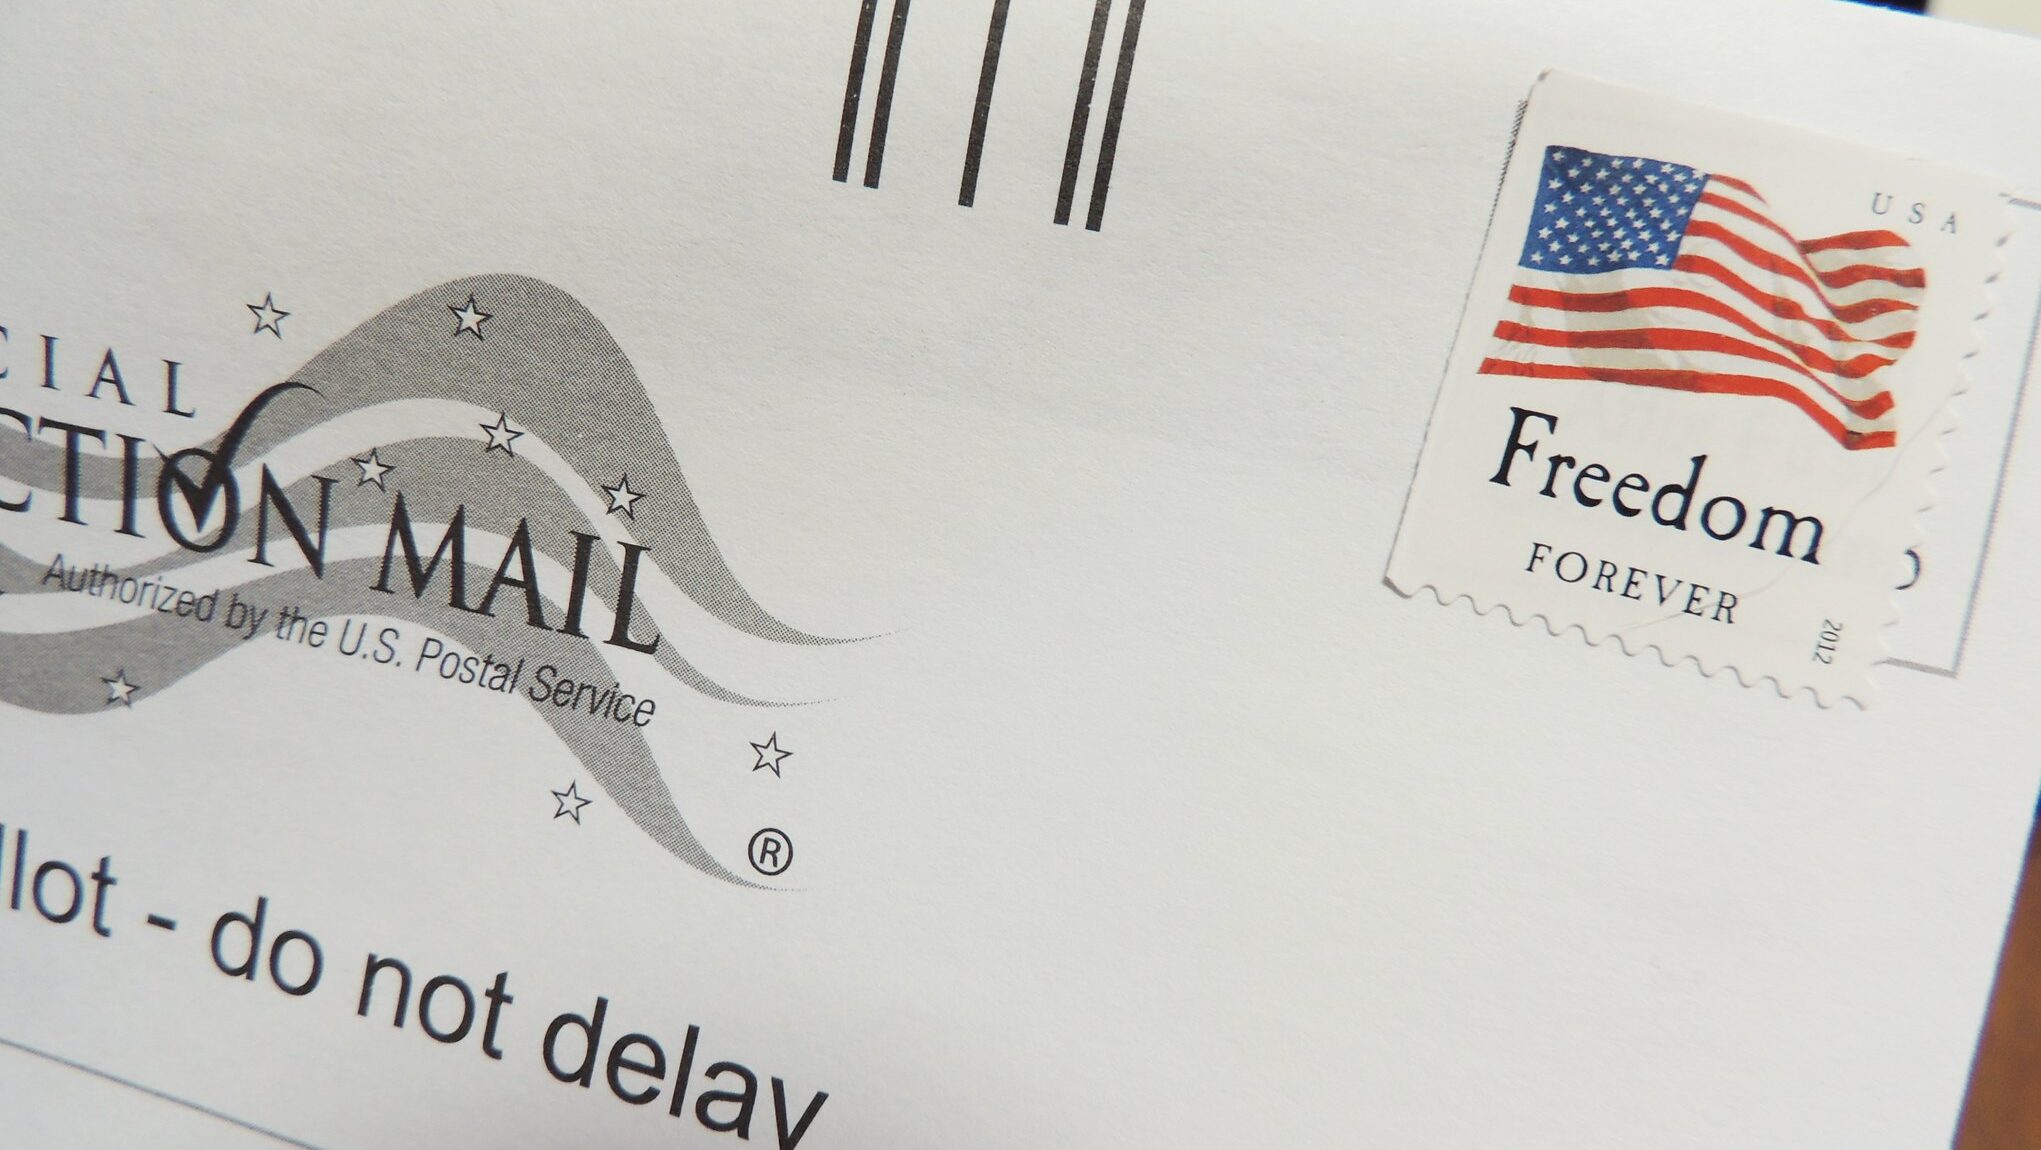 Appeals court upholds pennsylvania law rejecting undated mail ballots